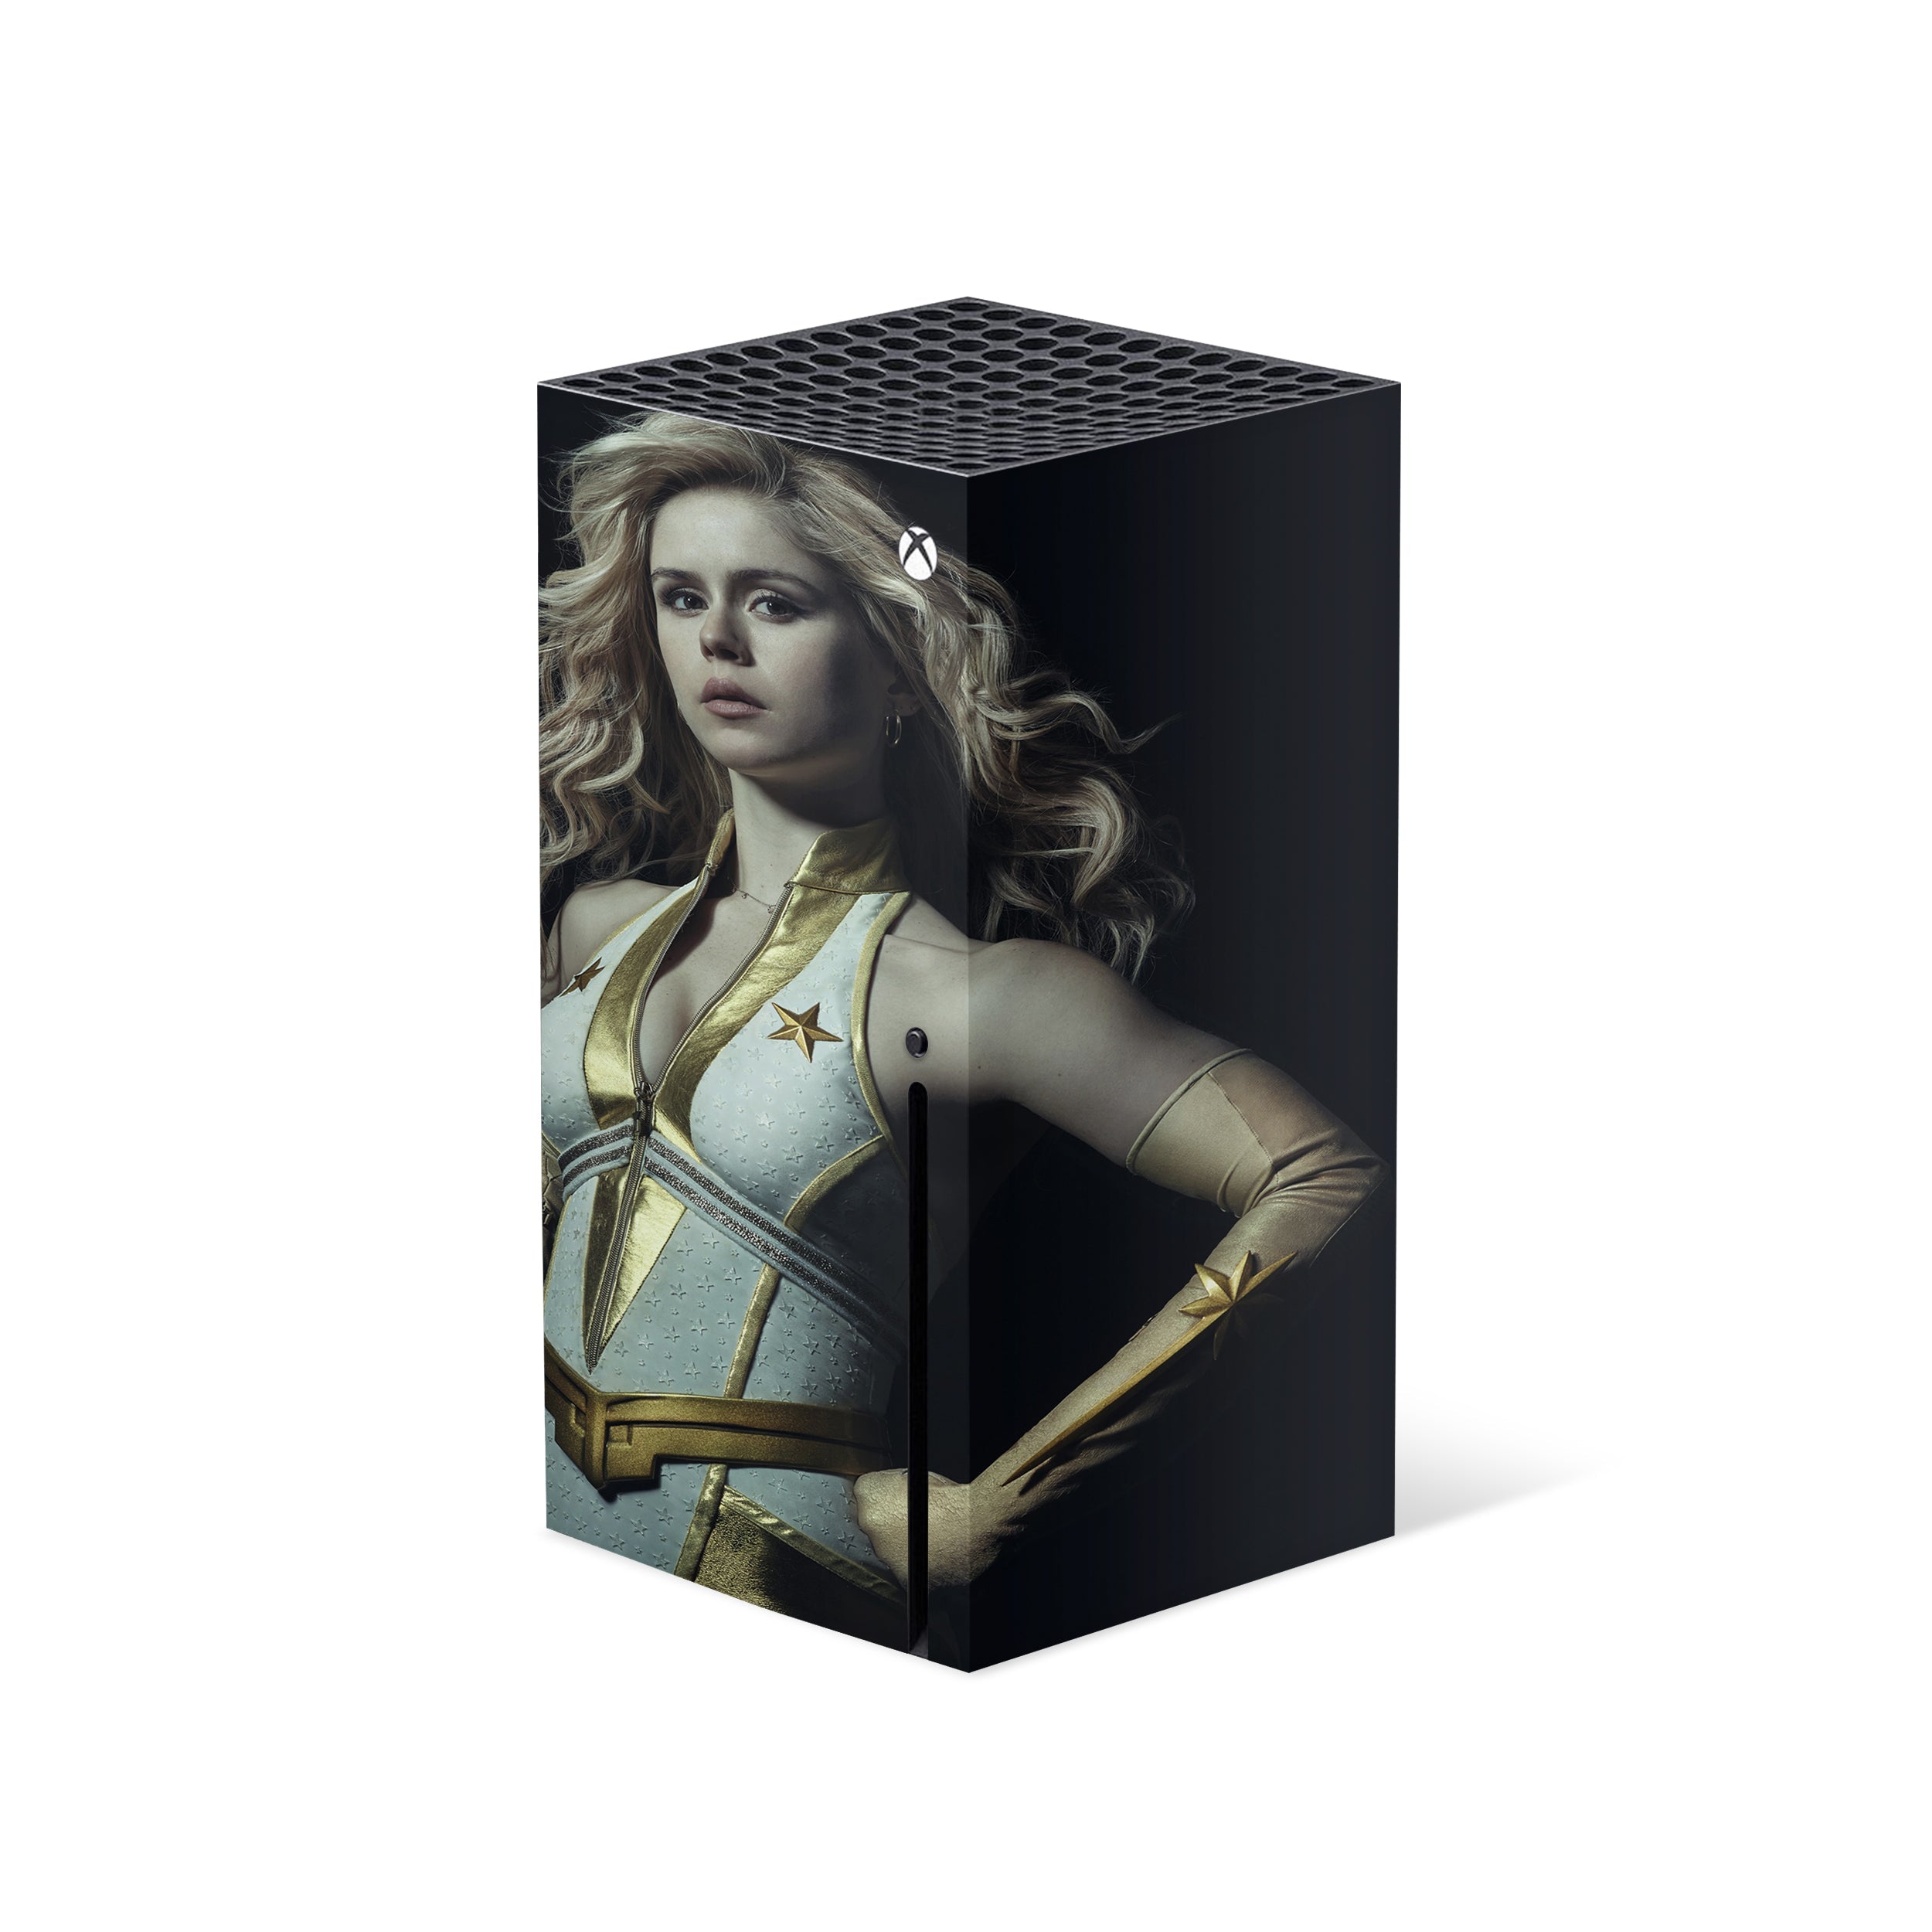 A video game skin featuring a The Boys Starlight design for the Xbox Series X.